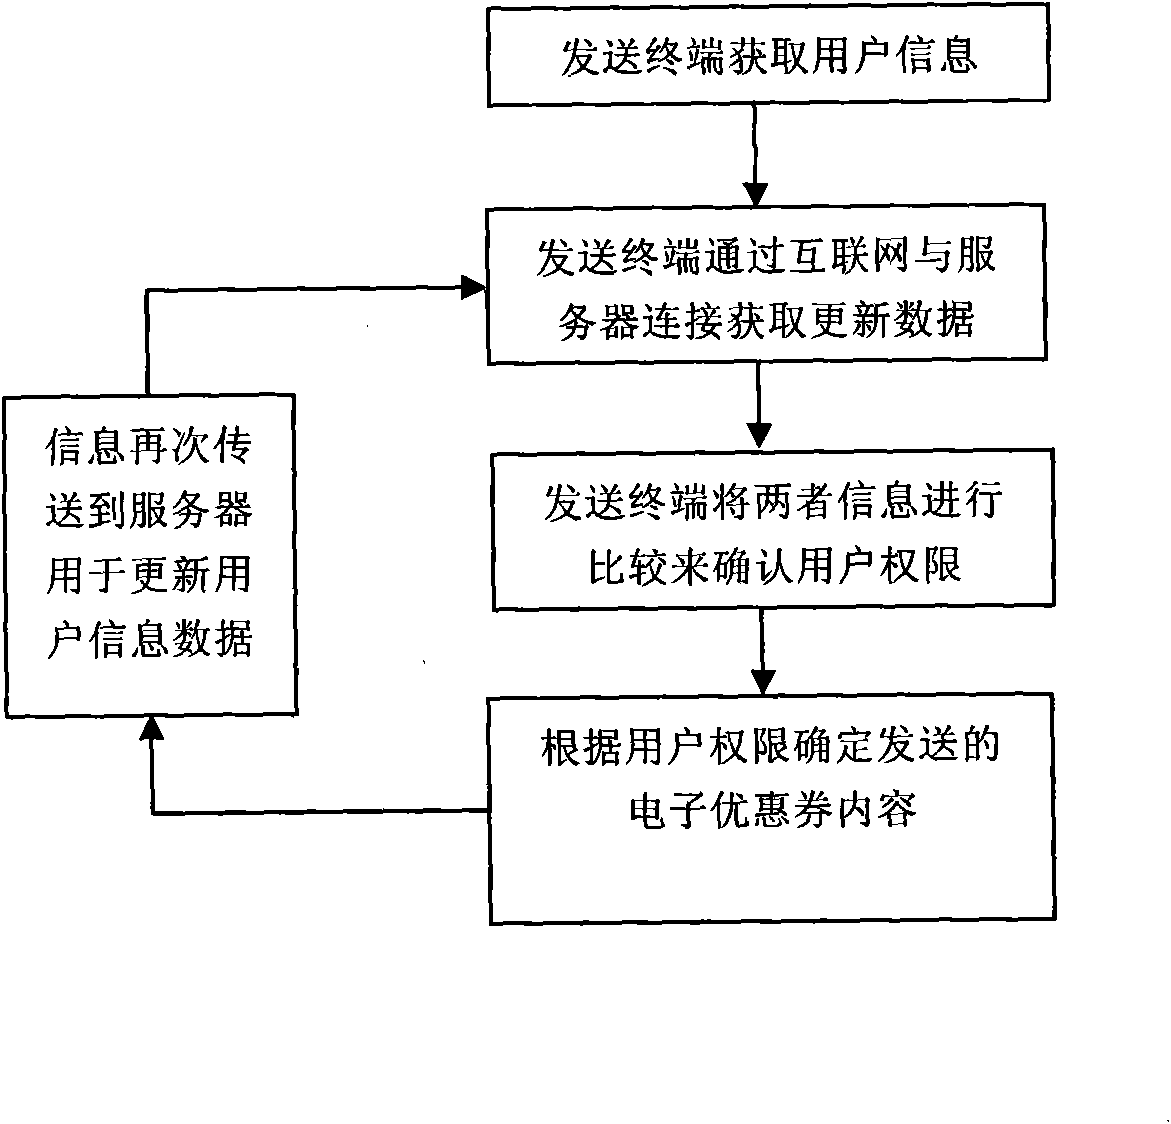 Method for transmitting encrypted electronic coupons by using Bluetooth